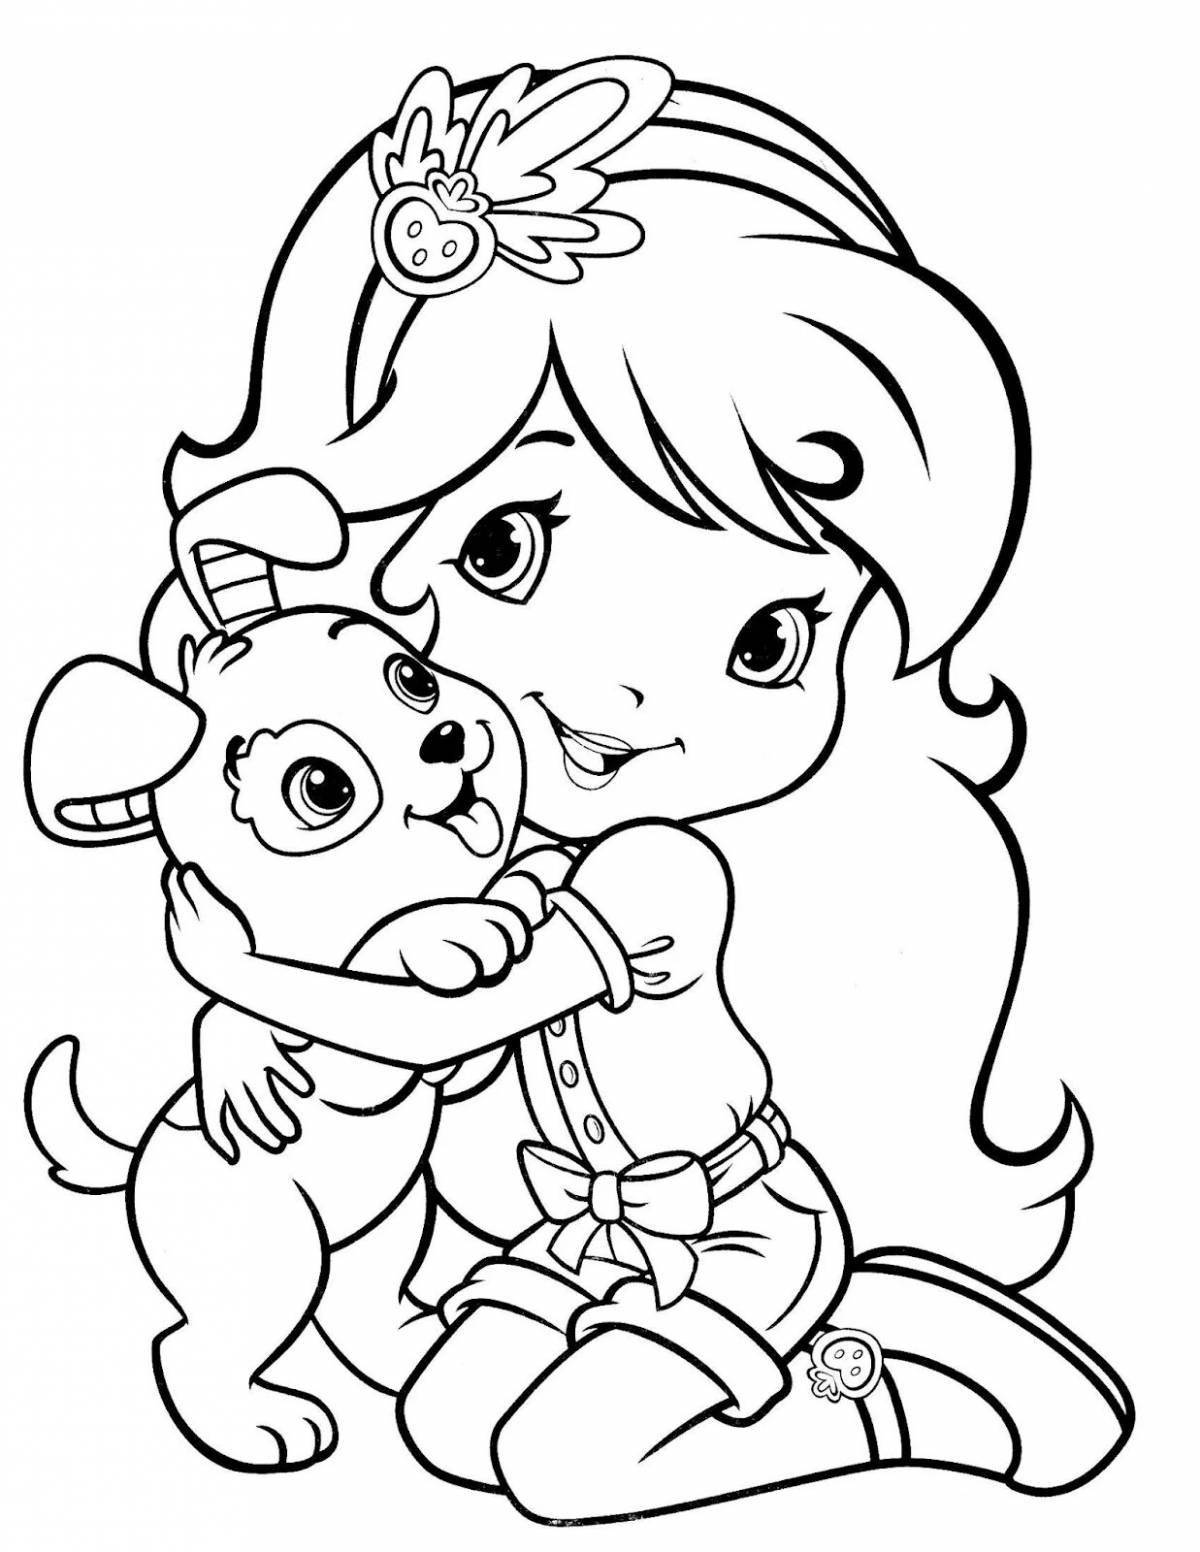 Adorable coloring book popular with kids